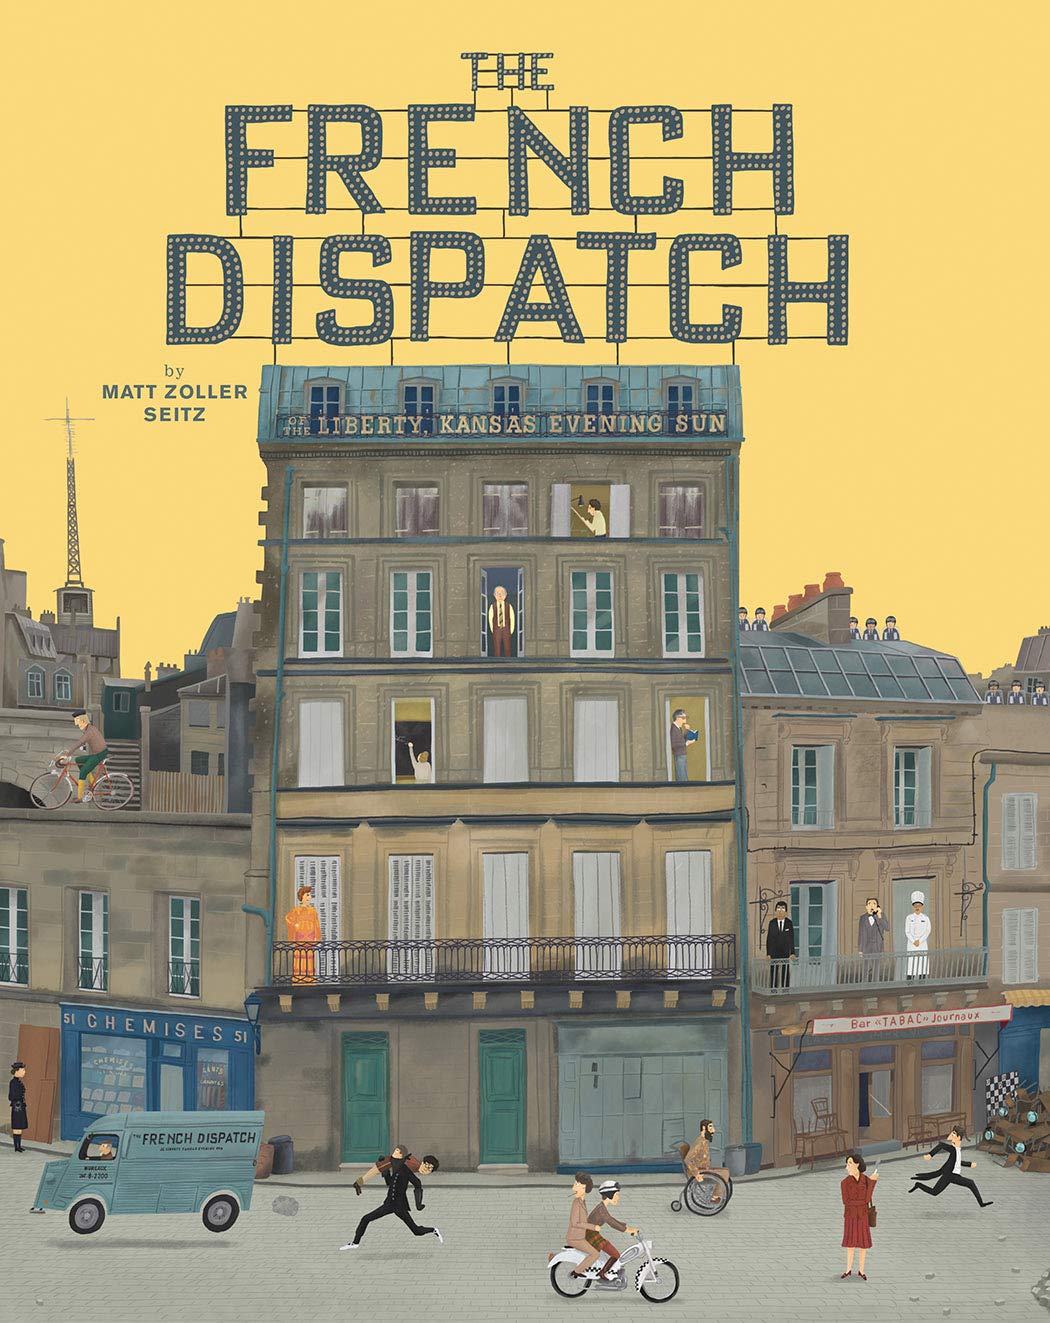 French dispatch release date indonesia